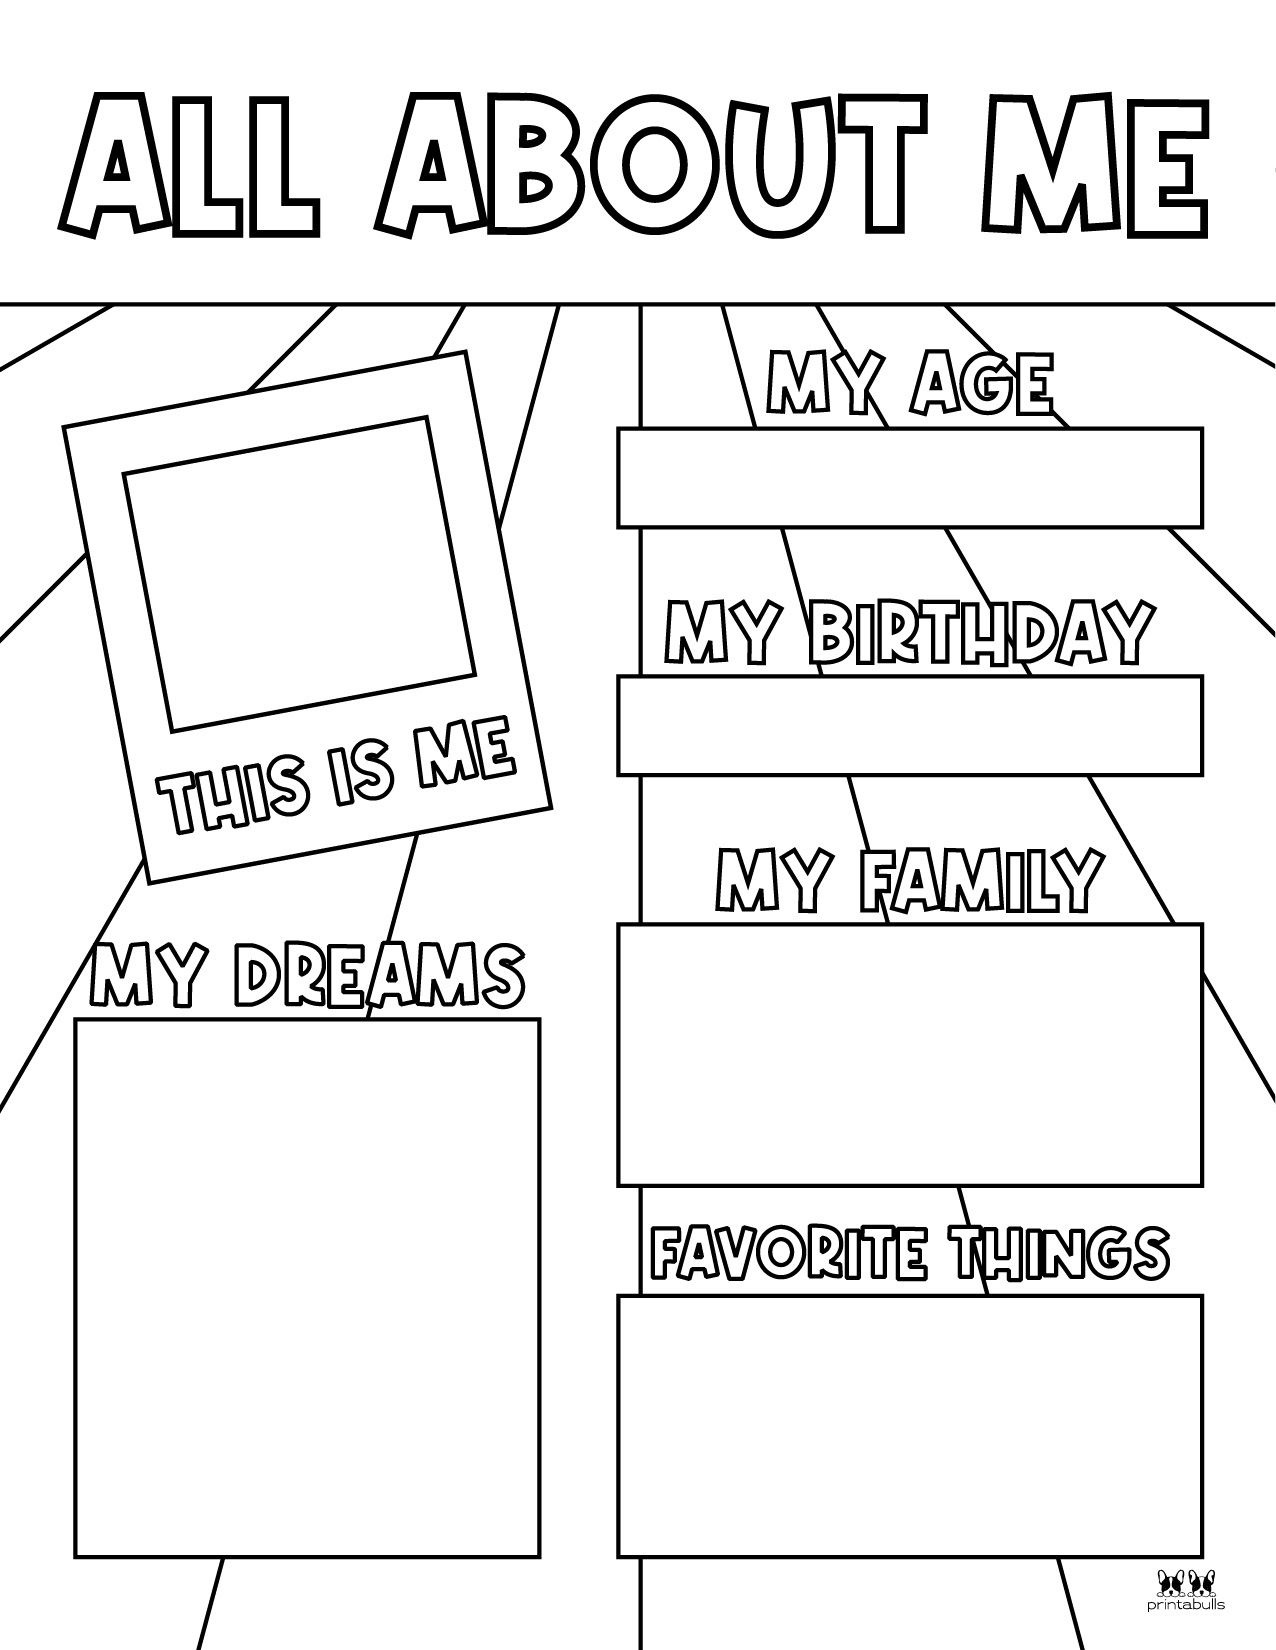 All About Me Worksheet Printable All About Me Preschool All About Me